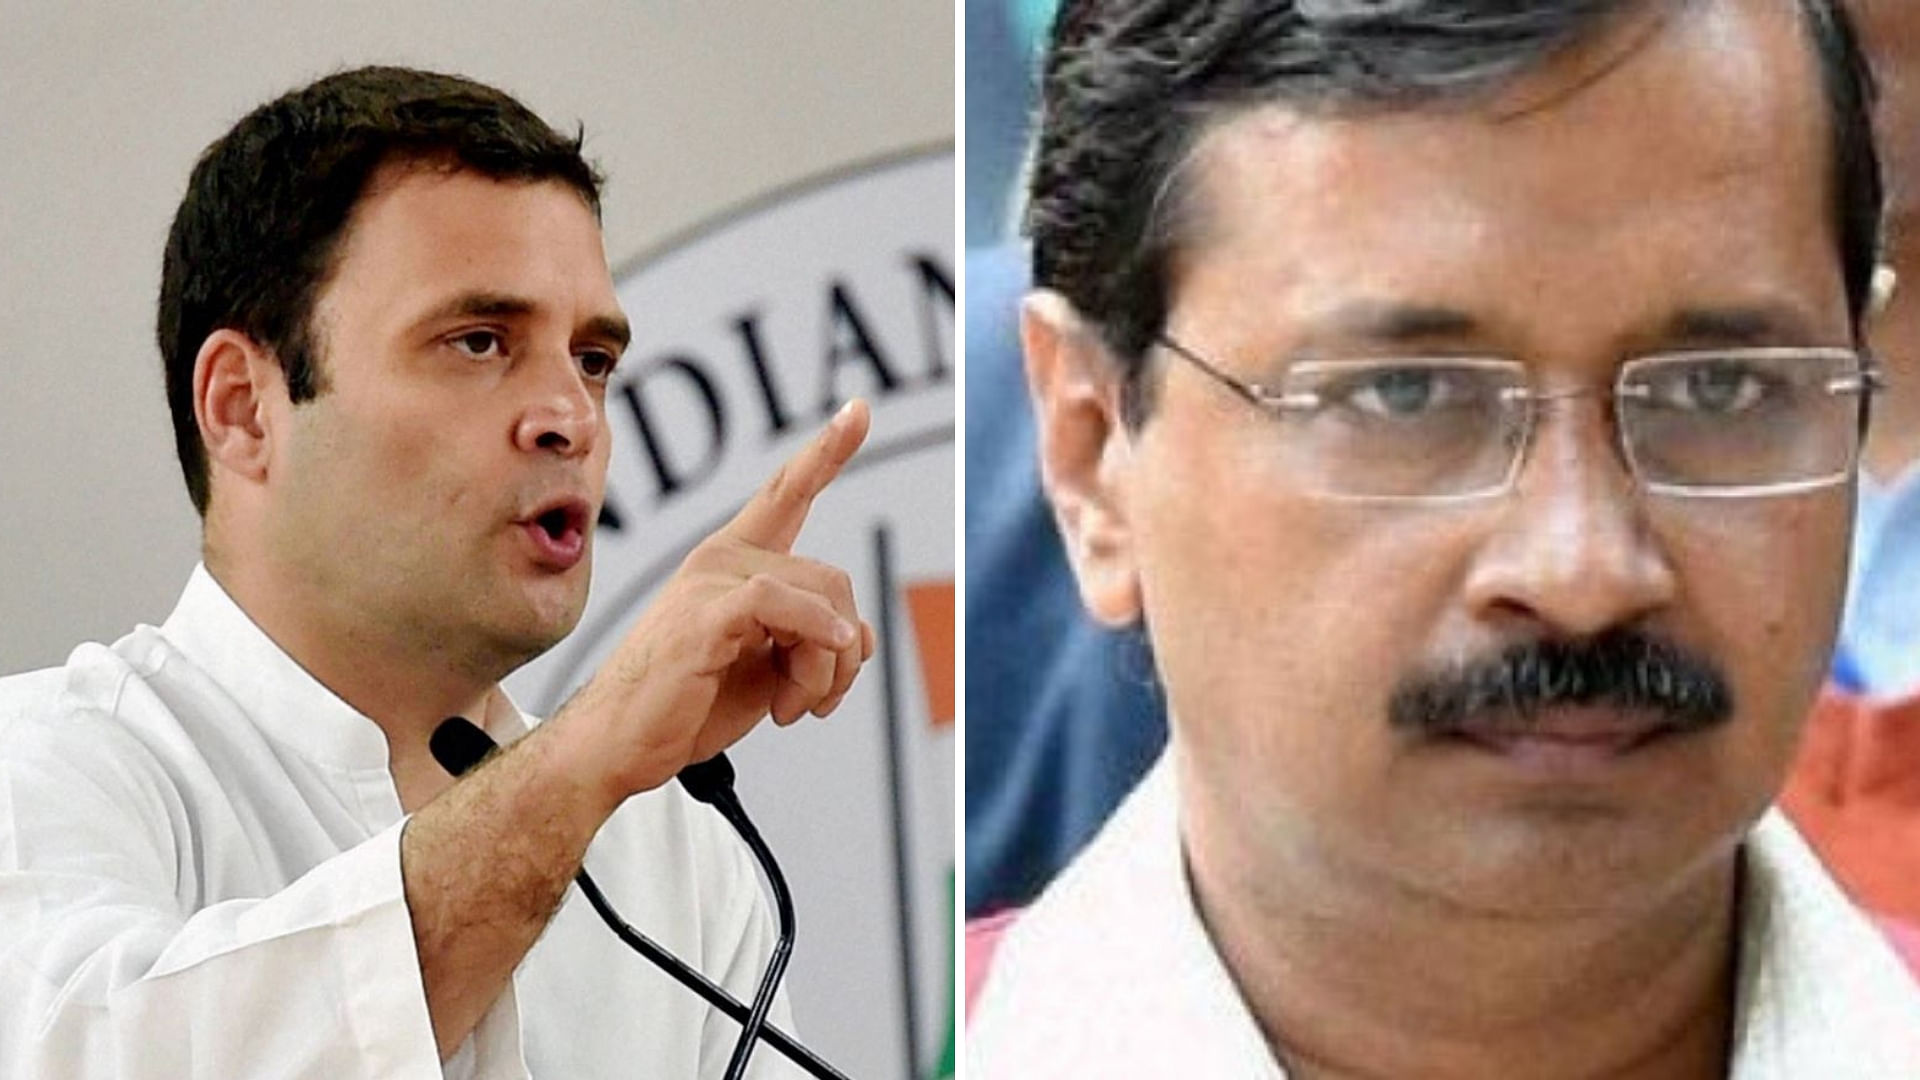 Rahul Gandhi had announced on Twitter that while the Congress was willing to enter into an alliance with the AAP, Arvind Kejriwal had done a ‘U-turn’.